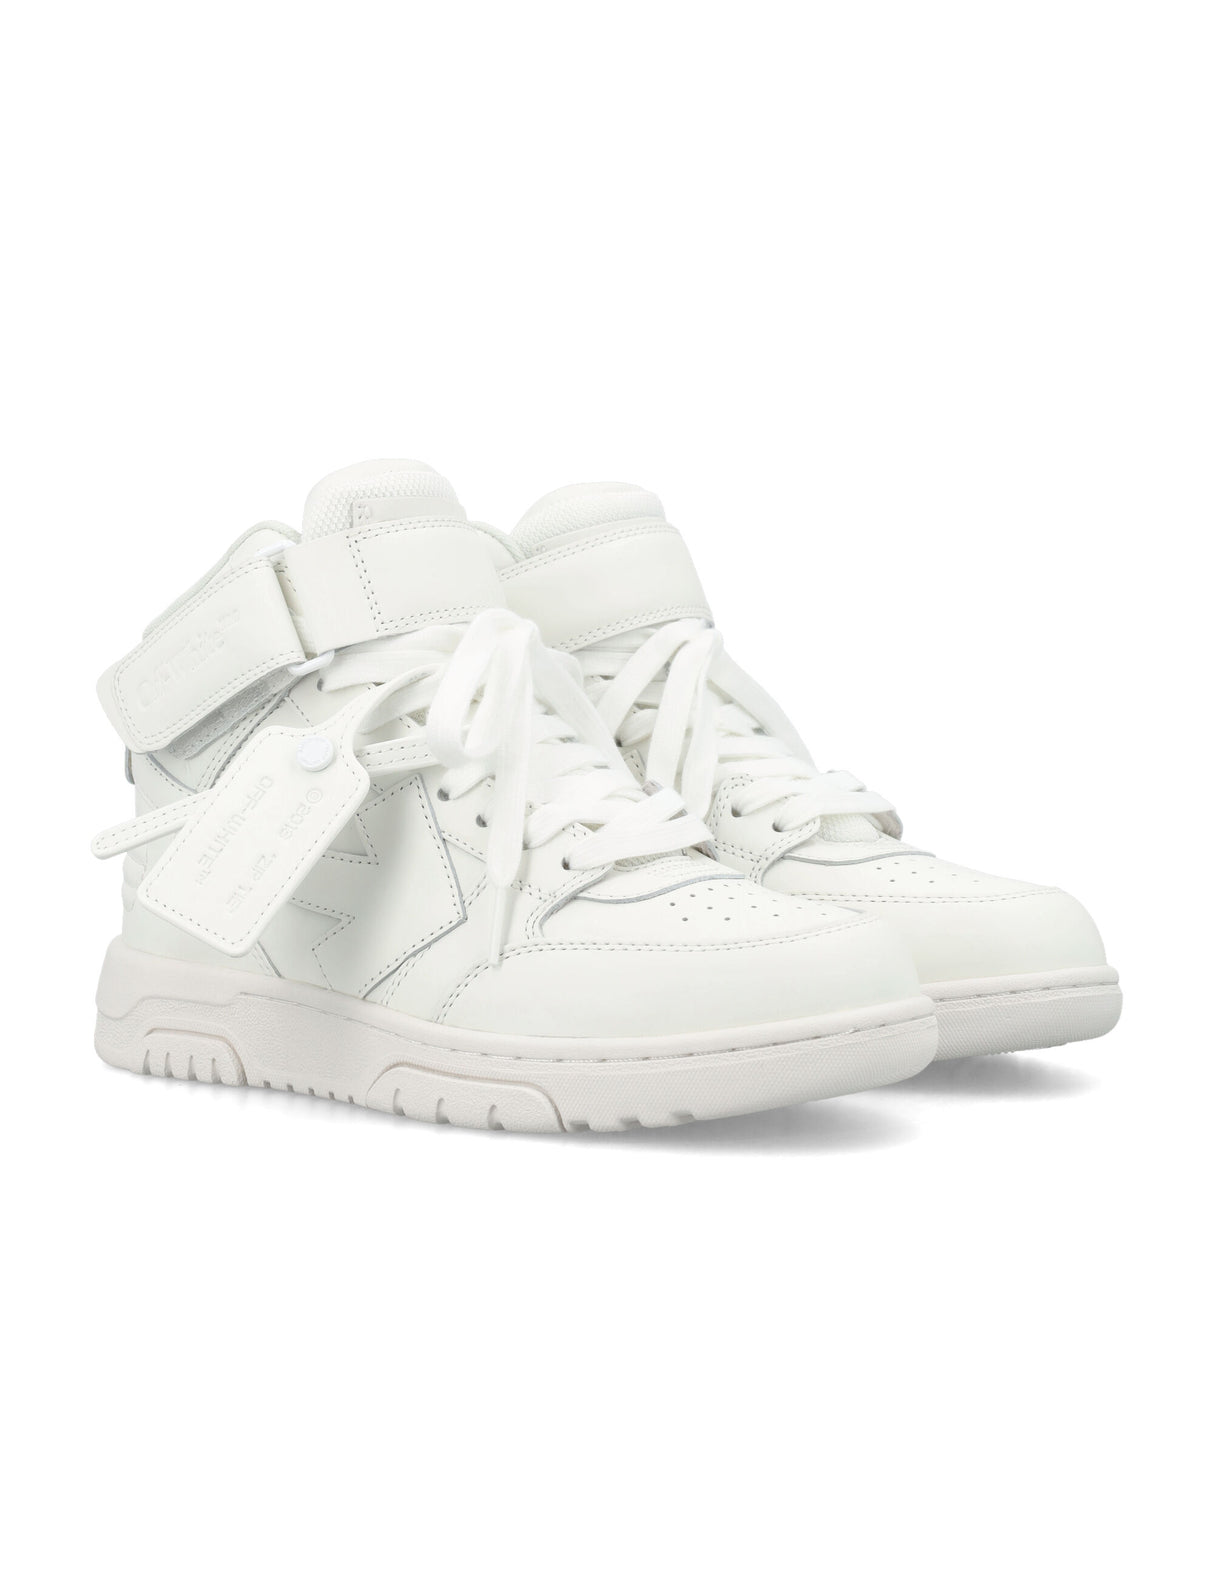 Mid-High White Sneakers for Women